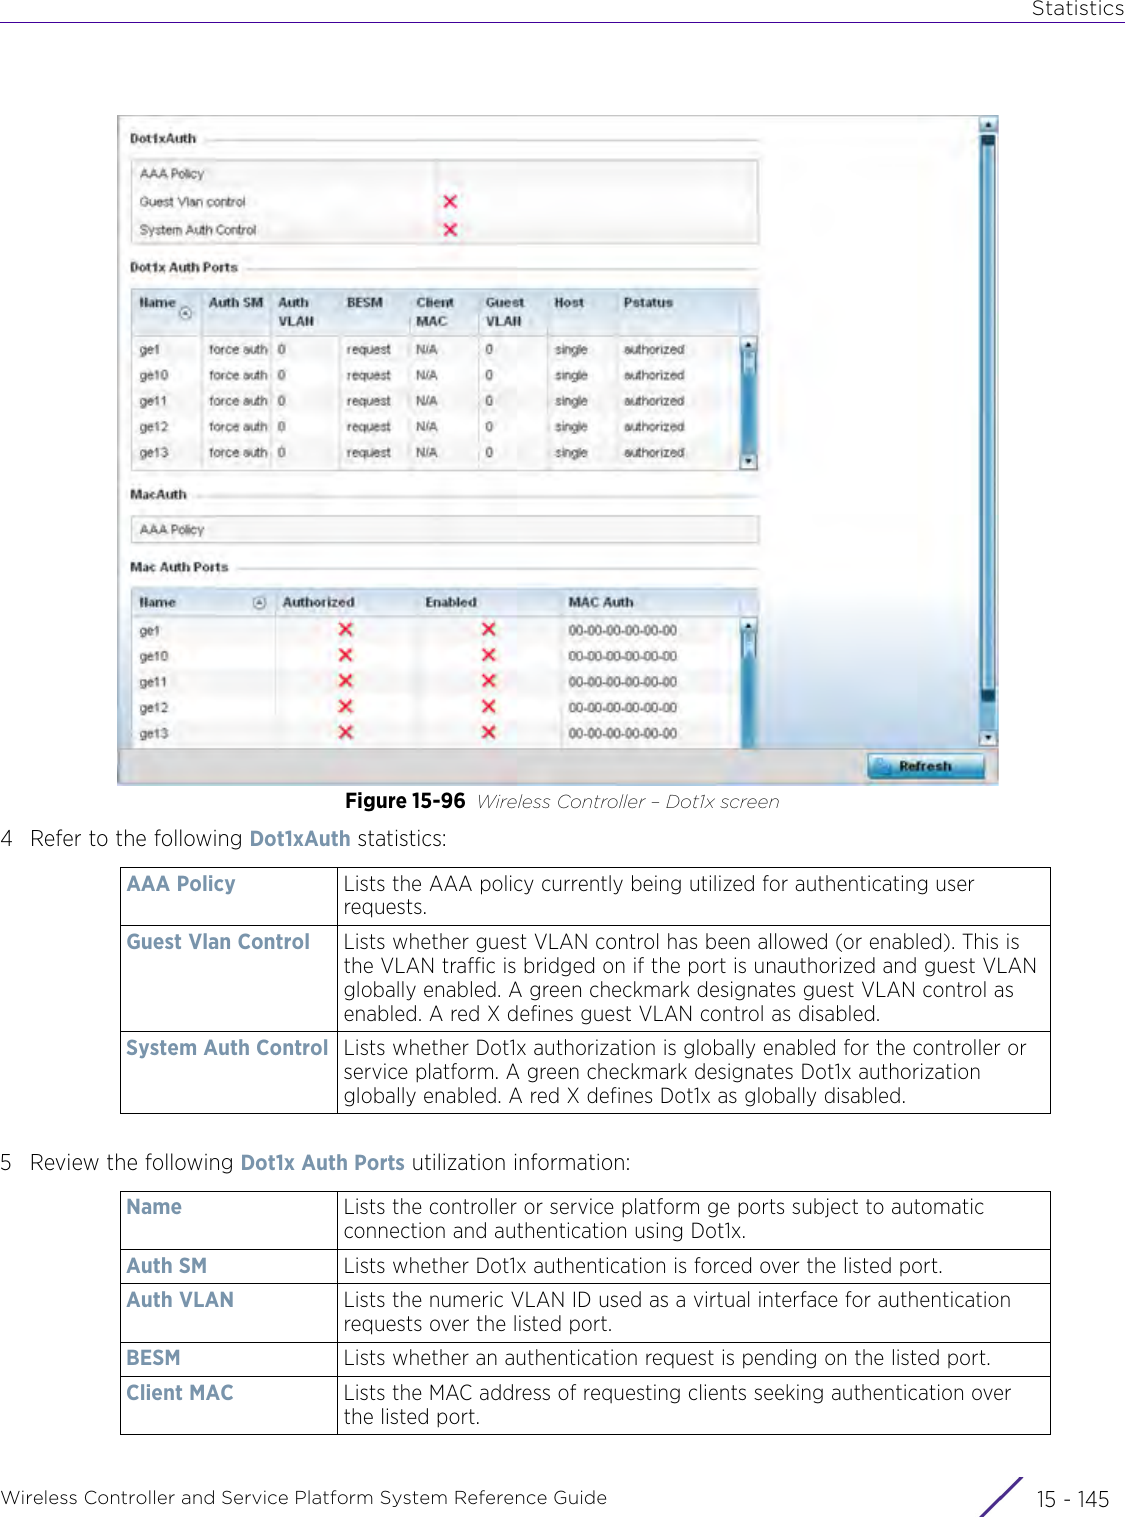 StatisticsWireless Controller and Service Platform System Reference Guide 15 - 145Figure 15-96 Wireless Controller – Dot1x screen4 Refer to the following Dot1xAuth statistics:5 Review the following Dot1x Auth Ports utilization information: AAA Policy Lists the AAA policy currently being utilized for authenticating user requests.Guest Vlan Control Lists whether guest VLAN control has been allowed (or enabled). This is the VLAN traffic is bridged on if the port is unauthorized and guest VLAN globally enabled. A green checkmark designates guest VLAN control as enabled. A red X defines guest VLAN control as disabled.System Auth Control Lists whether Dot1x authorization is globally enabled for the controller or service platform. A green checkmark designates Dot1x authorization globally enabled. A red X defines Dot1x as globally disabled.Name Lists the controller or service platform ge ports subject to automatic connection and authentication using Dot1x.Auth SM Lists whether Dot1x authentication is forced over the listed port.Auth VLAN Lists the numeric VLAN ID used as a virtual interface for authentication requests over the listed port.BESM Lists whether an authentication request is pending on the listed port.Client MAC Lists the MAC address of requesting clients seeking authentication over the listed port.